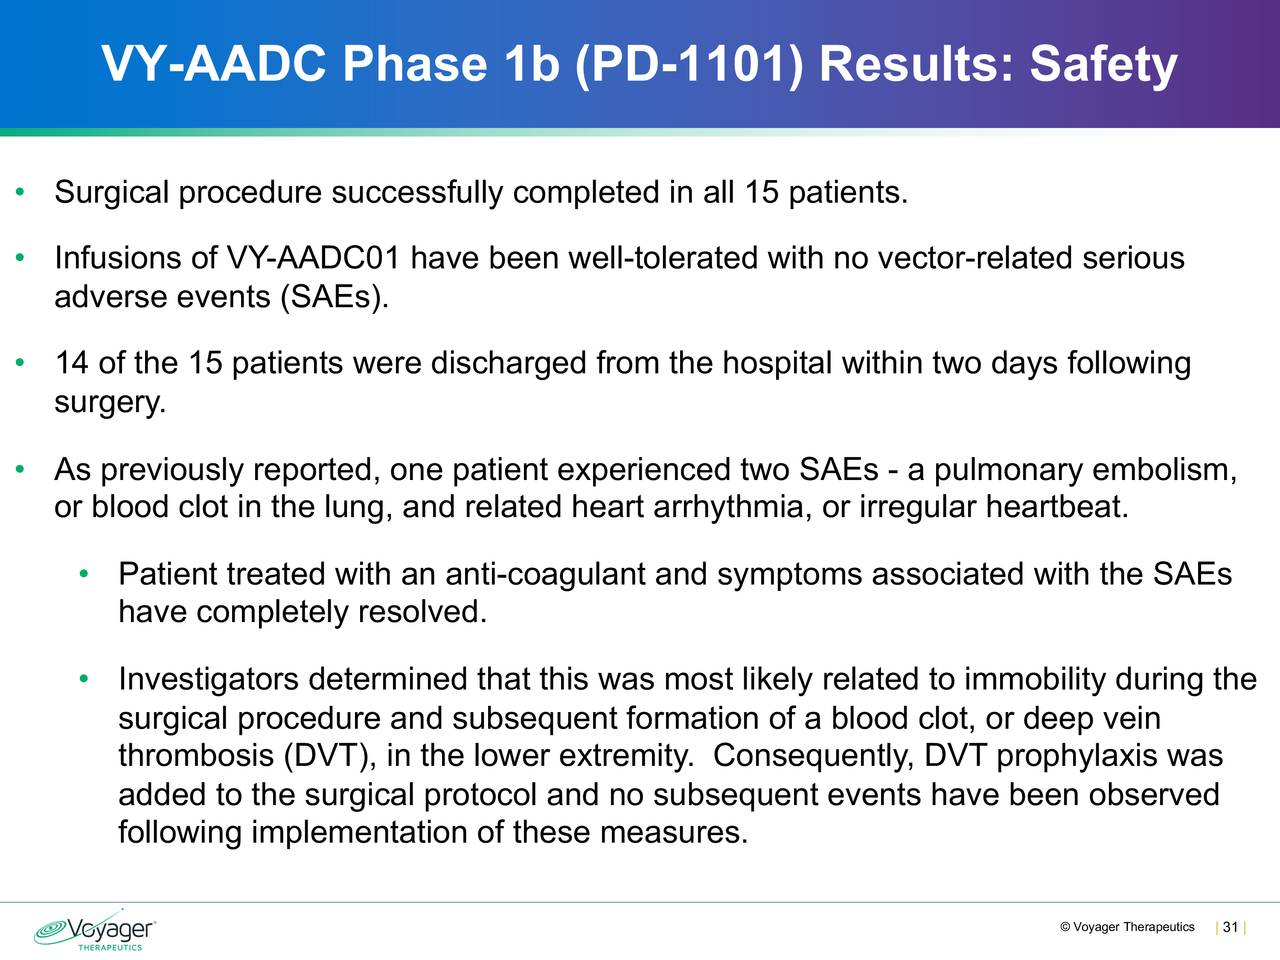 VY-AADC Phase 1b (PD-1101) Results: Safety